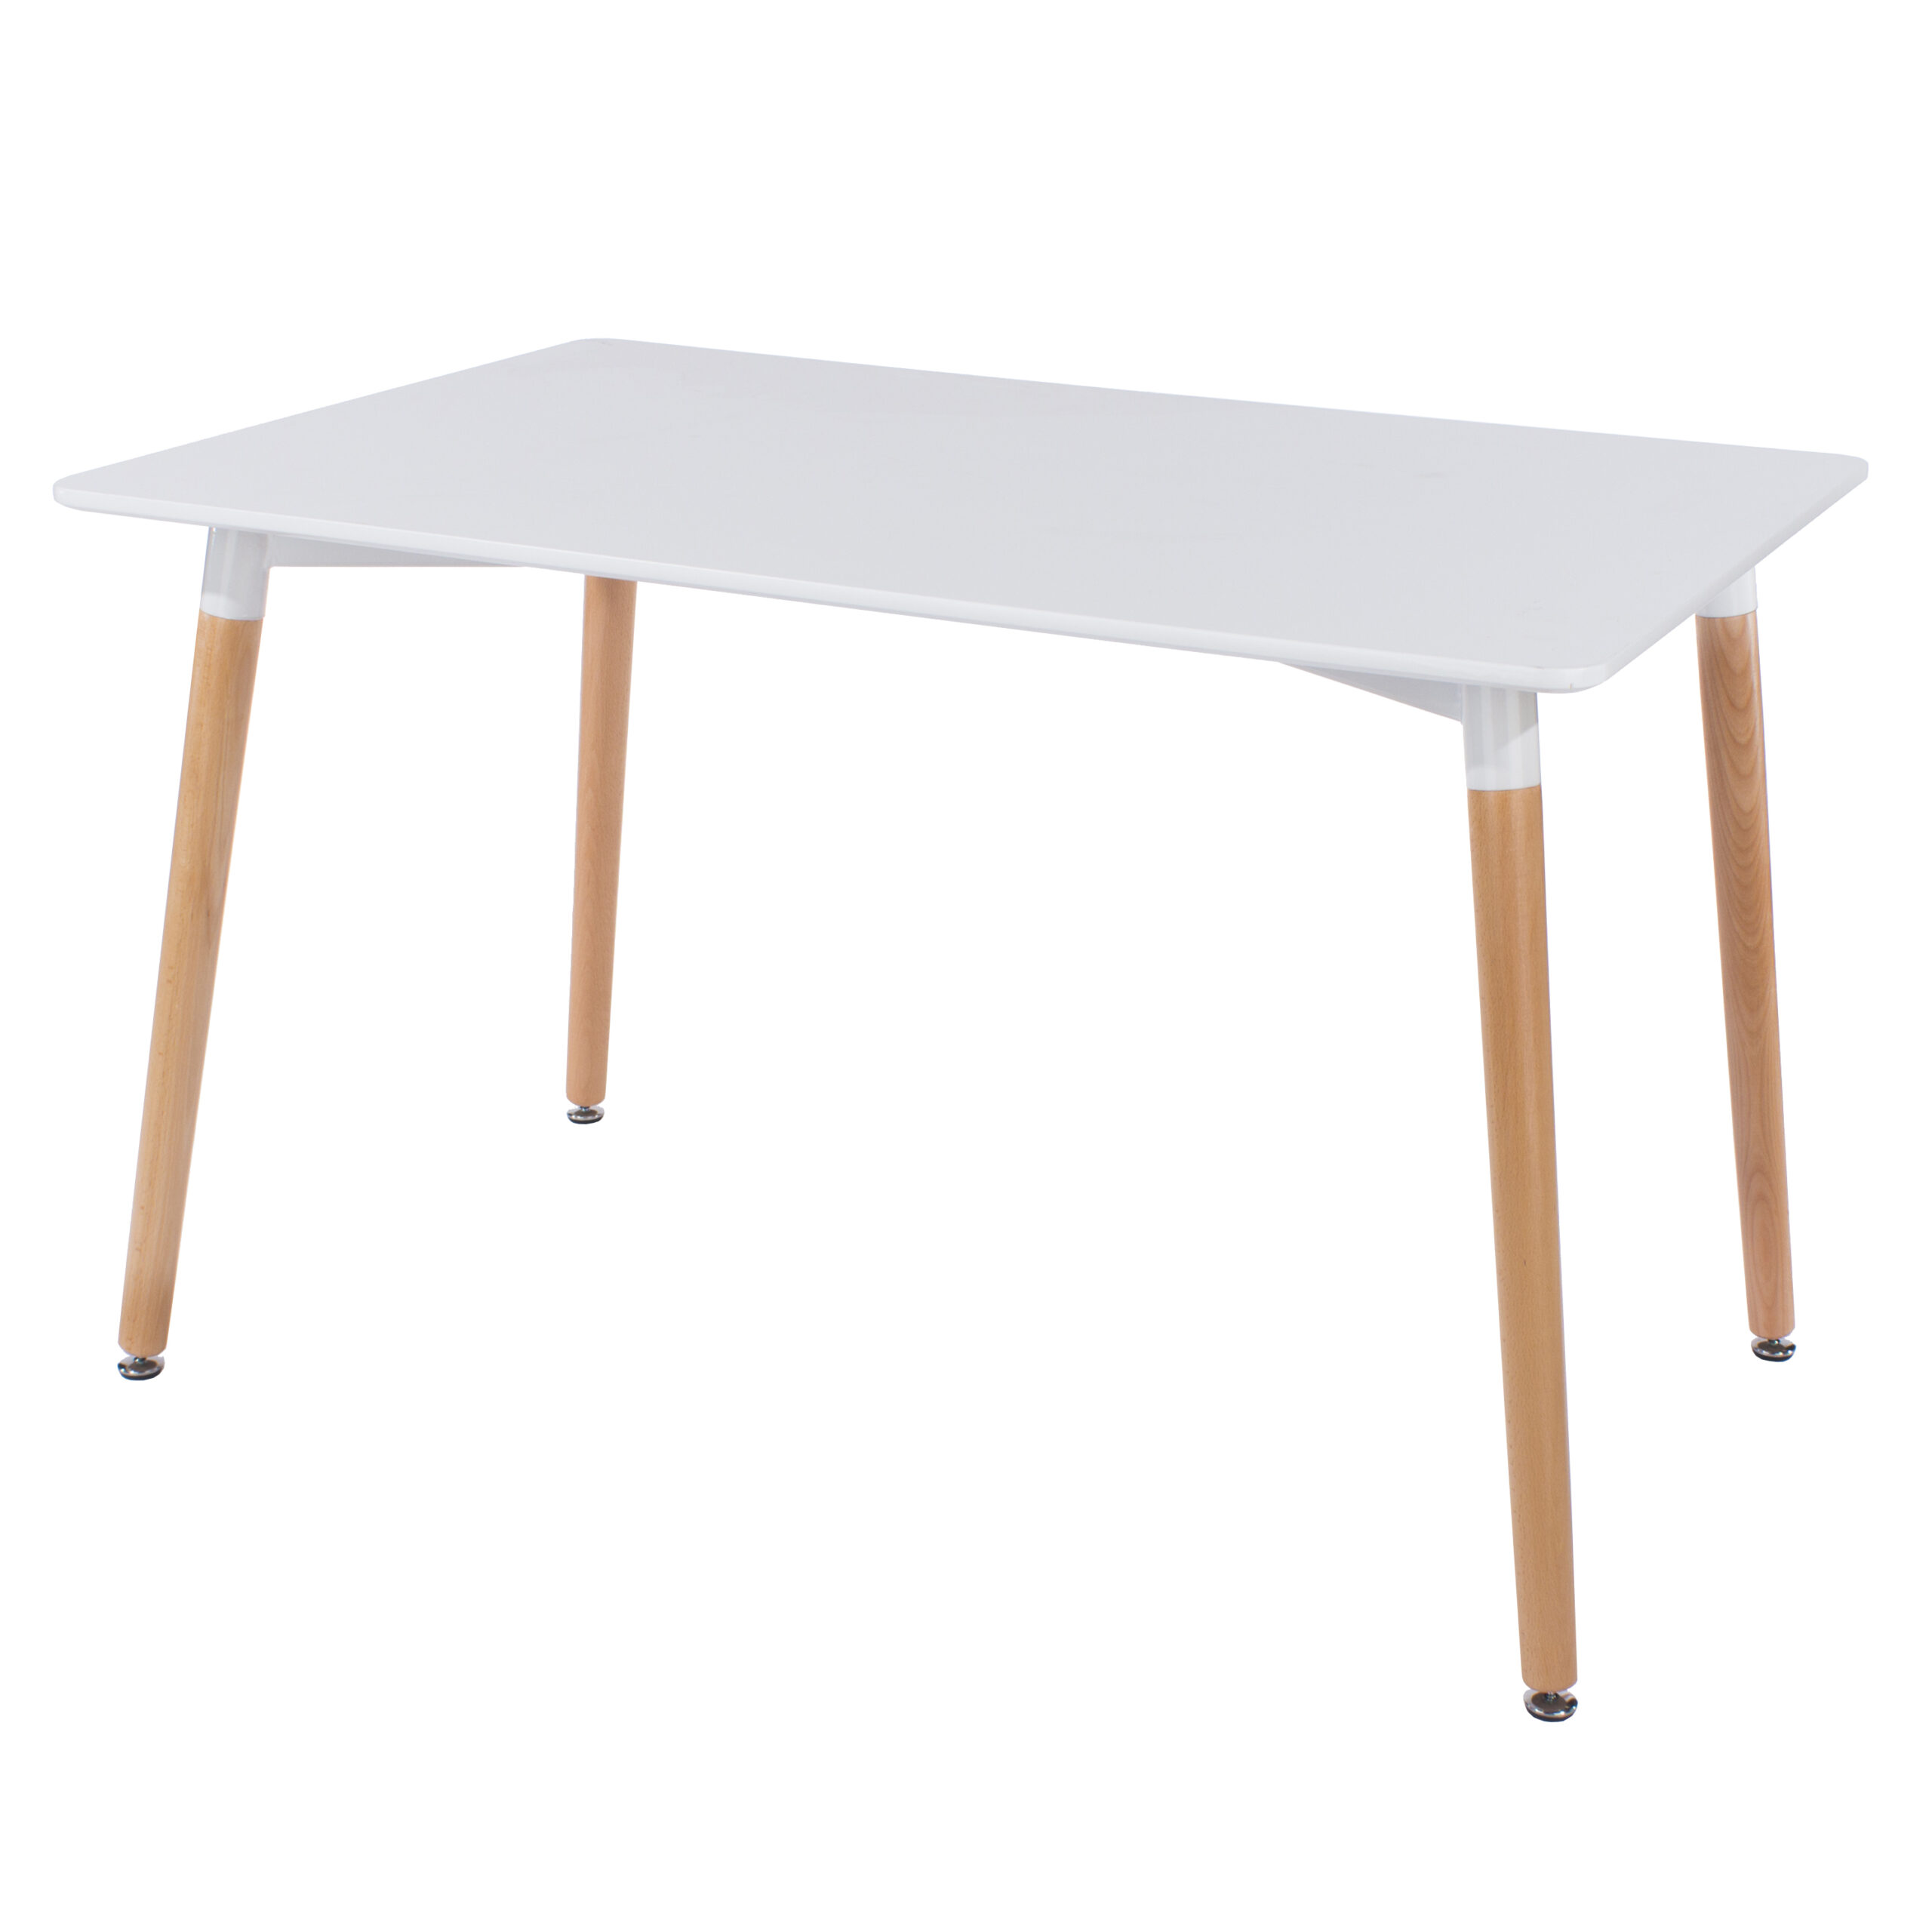 Penny rectangular table with wooden legs